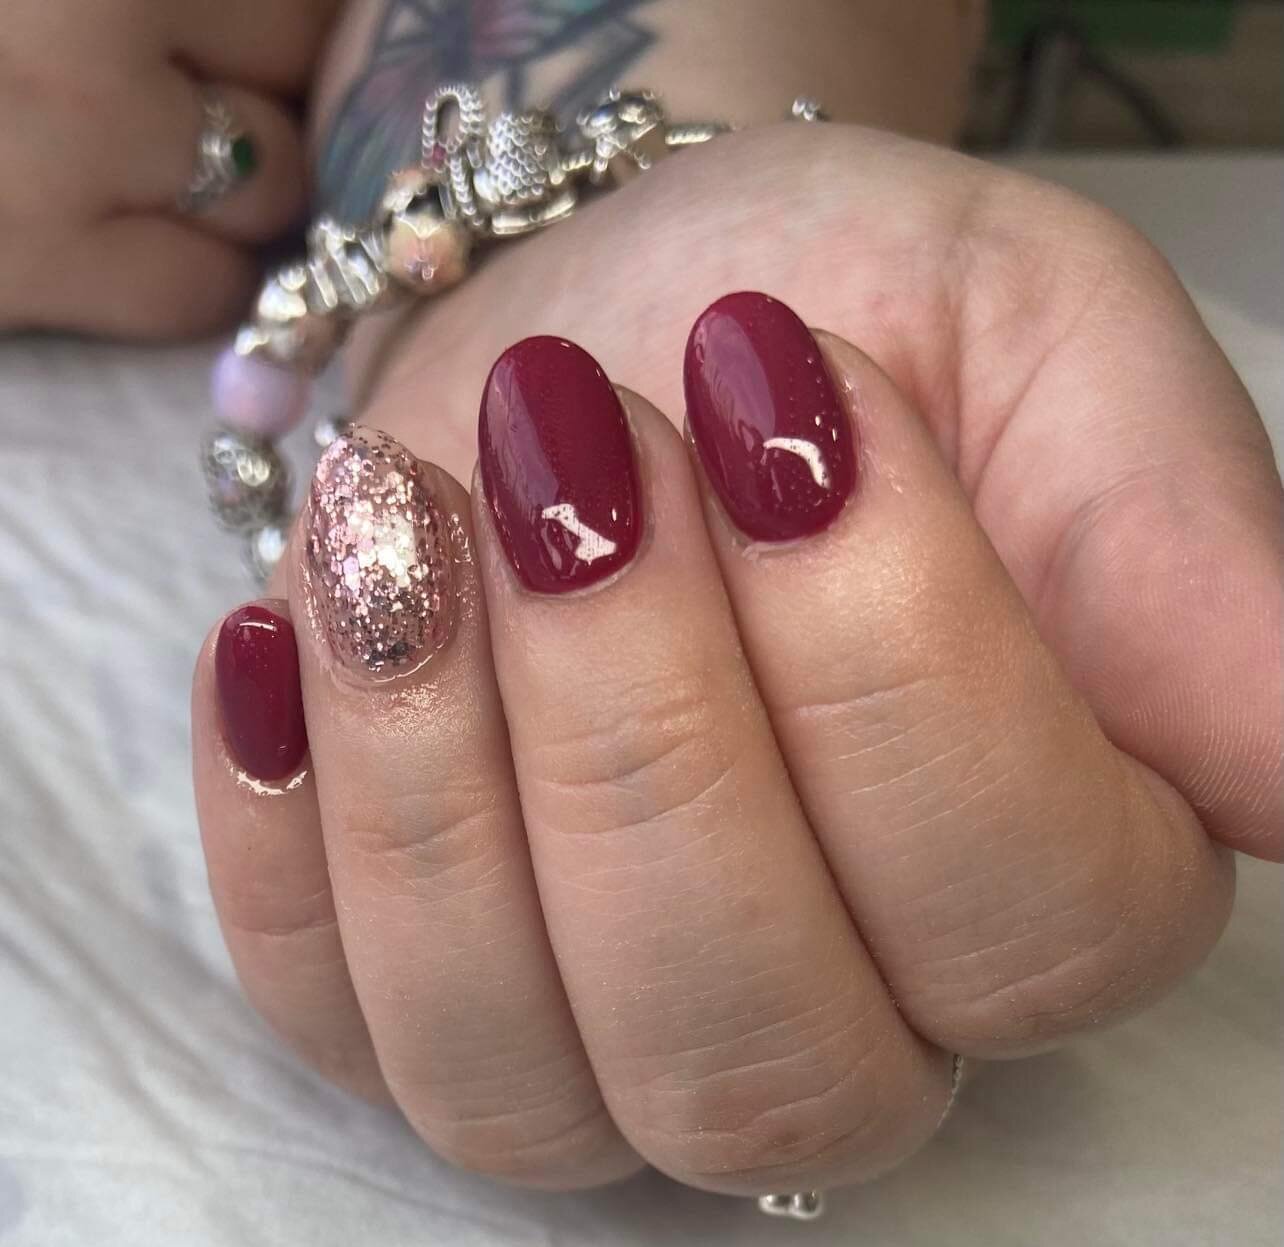 Add a lil 𝒈𝒍𝒊𝒕𝒕𝒆𝒓 ✨

Spice up your nails by adding a little detail to your ring finger. By 𝑹𝒆𝒃𝒆𝒄𝒄𝒂 🤎

Click 𝑩𝒐𝒐𝒌 𝑵𝒐𝒘 to book your nail appointment 

#ashleyclarkesignaturesalon #southqueensferrysalon #tgbnails #tgb #gelnails #bi